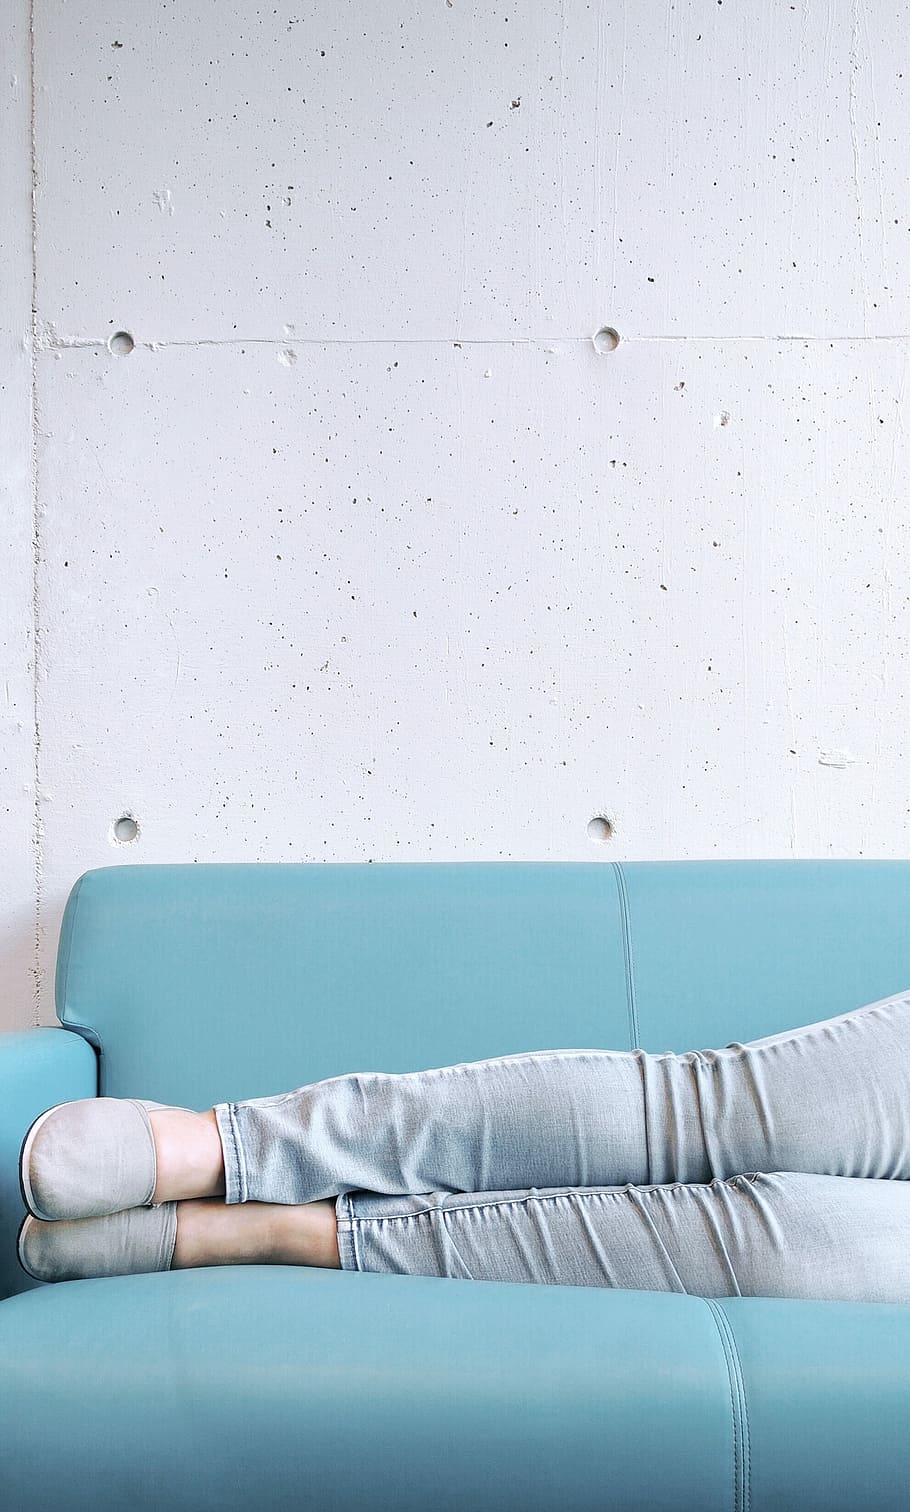 person, wearing, gray, skinny, jeans, slip, shoes, sky-blue couch, skinny jeans, slip on